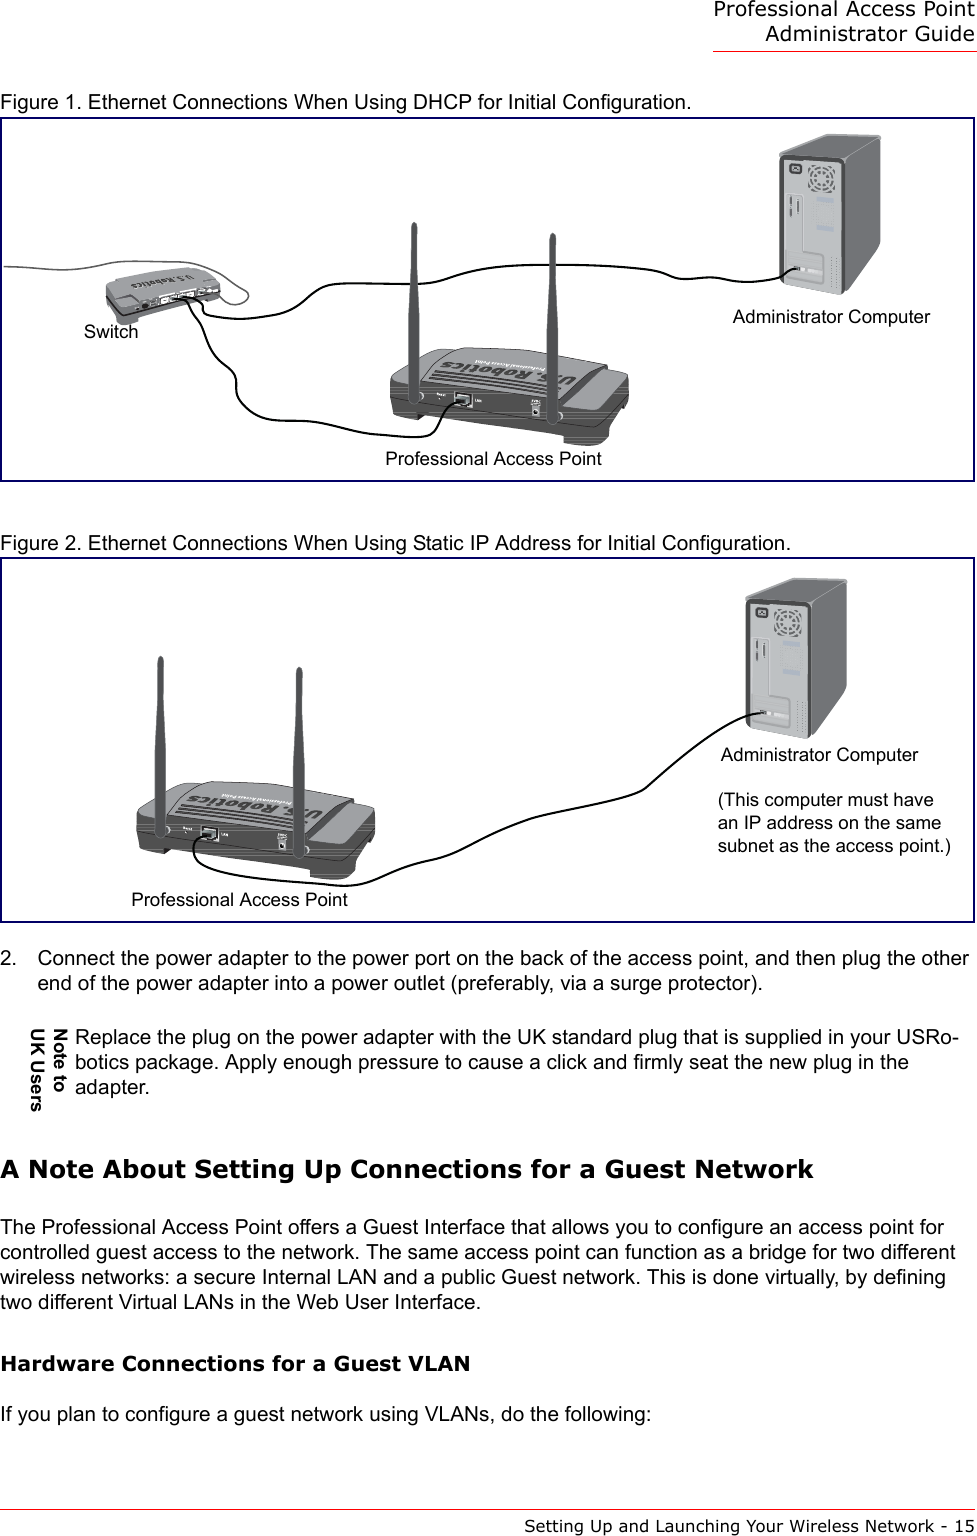 Professional Access Point Administrator GuideSetting Up and Launching Your Wireless Network - 15Figure 1. Ethernet Connections When Using DHCP for Initial Configuration.Figure 2. Ethernet Connections When Using Static IP Address for Initial Configuration.2. Connect the power adapter to the power port on the back of the access point, and then plug the other end of the power adapter into a power outlet (preferably, via a surge protector). A Note About Setting Up Connections for a Guest NetworkThe Professional Access Point offers a Guest Interface that allows you to configure an access point for controlled guest access to the network. The same access point can function as a bridge for two different wireless networks: a secure Internal LAN and a public Guest network. This is done virtually, by defining two different Virtual LANs in the Web User Interface.Hardware Connections for a Guest VLANIf you plan to configure a guest network using VLANs, do the following:Note to UK UsersReplace the plug on the power adapter with the UK standard plug that is supplied in your USRo-botics package. Apply enough pressure to cause a click and firmly seat the new plug in the adapter.Administrator ComputerProfessional Access PointSwitch(This computer must have an IP address on the same subnet as the access point.)Administrator ComputerProfessional Access Point